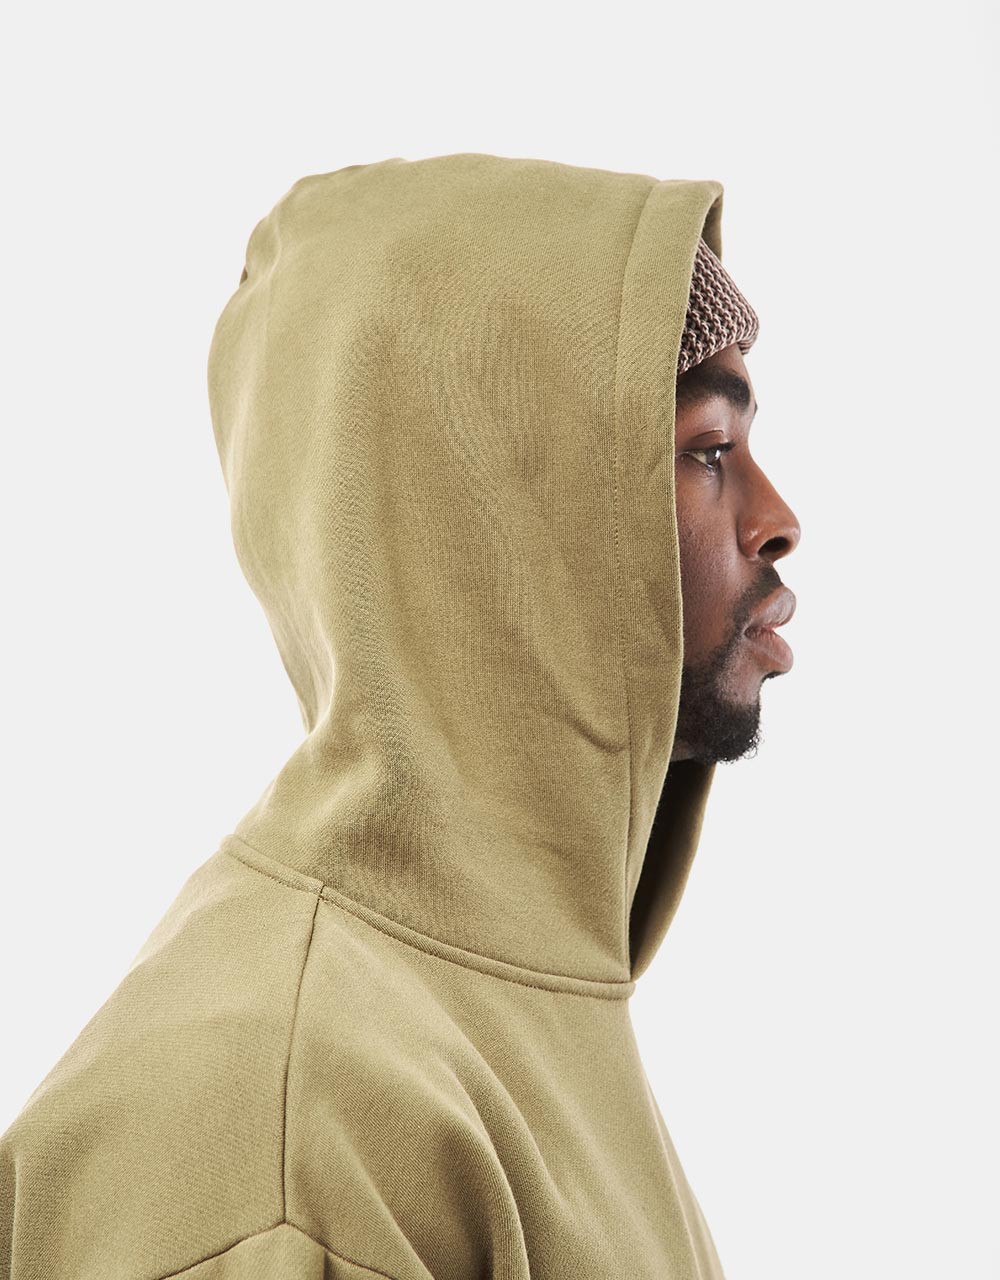 Butter Goods All Terrain Pullover Hoodie - Army